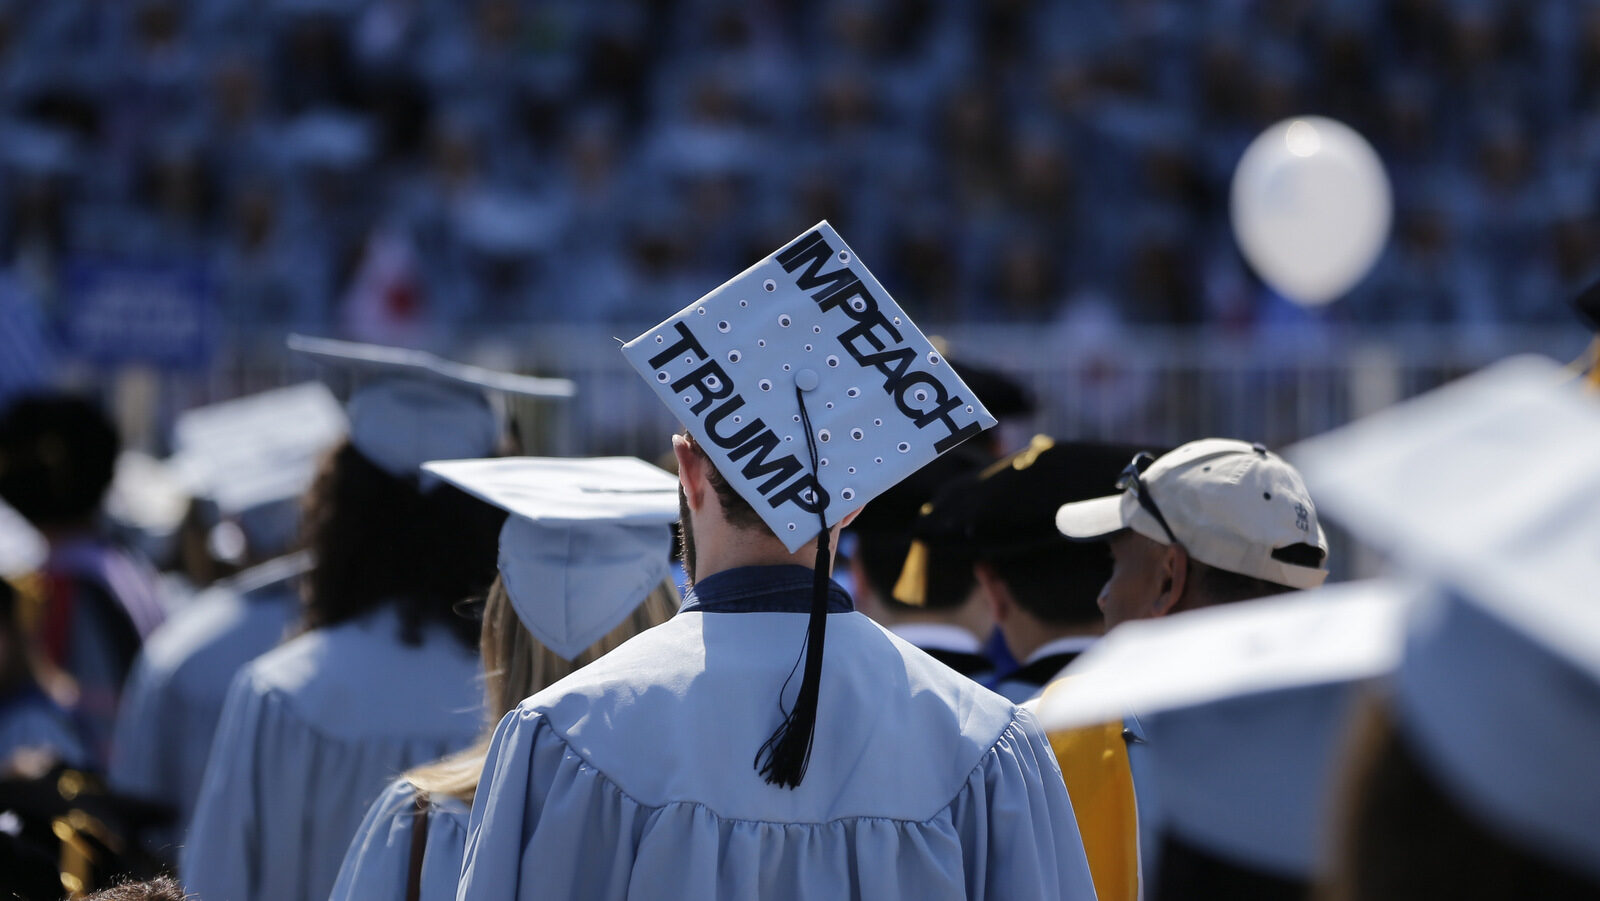 A student wears a hat reading "Impeach Trump" during a graduation ceremony at Columbia University in New York, Wednesday, May 17, 2017. (AP/Seth Wenig)